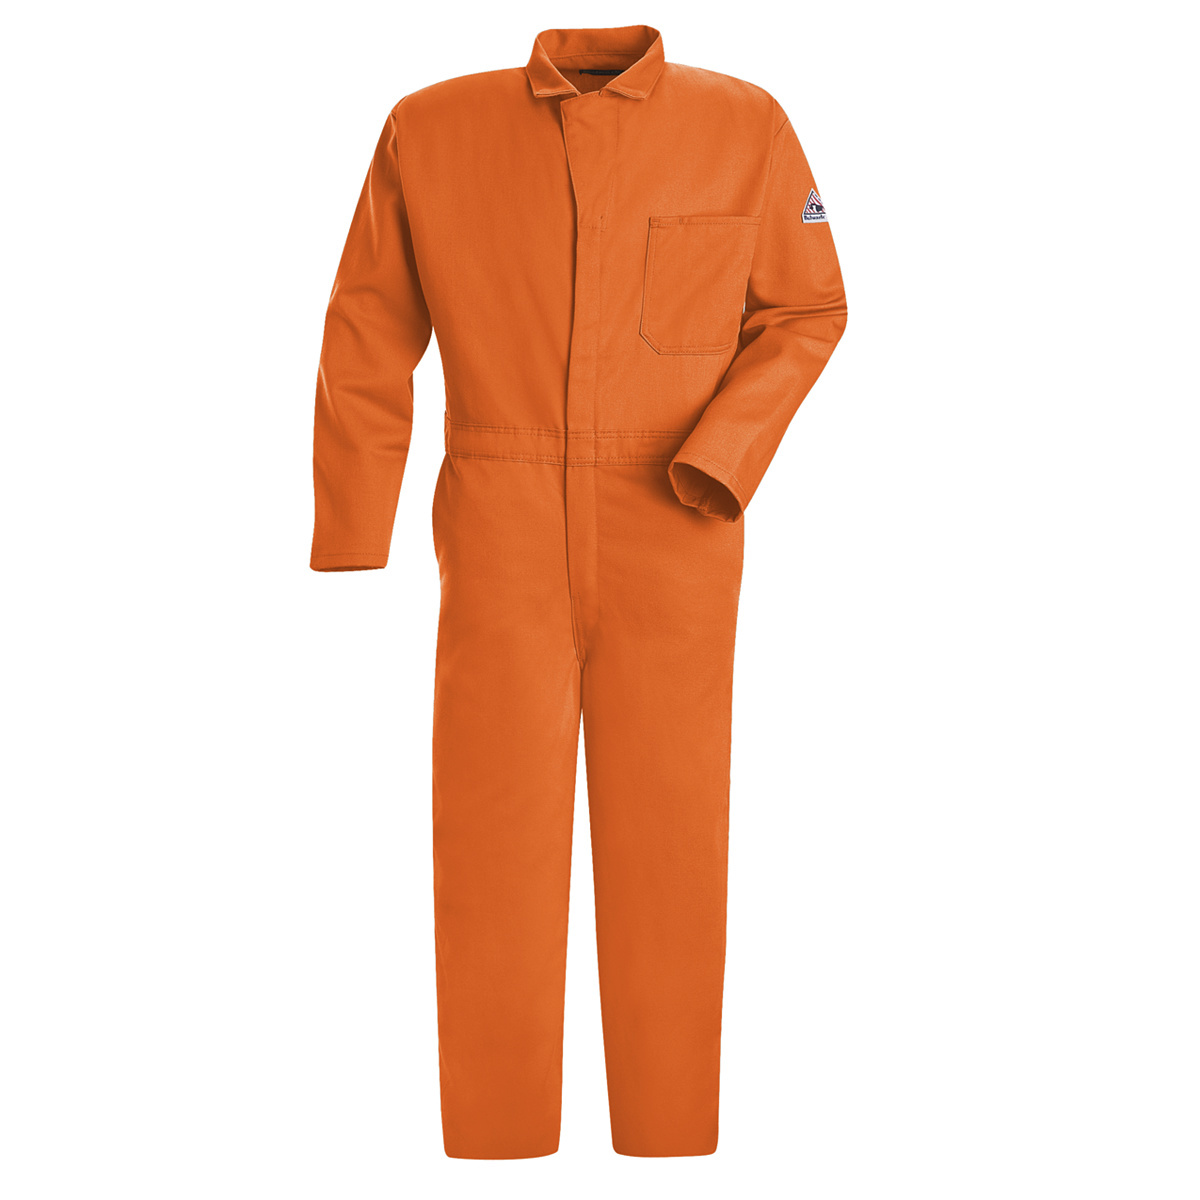 Bulwark® 38 Regular Orange EXCEL FR® Twill Cotton Flame Resistant Coveralls With Zipper Front Closure